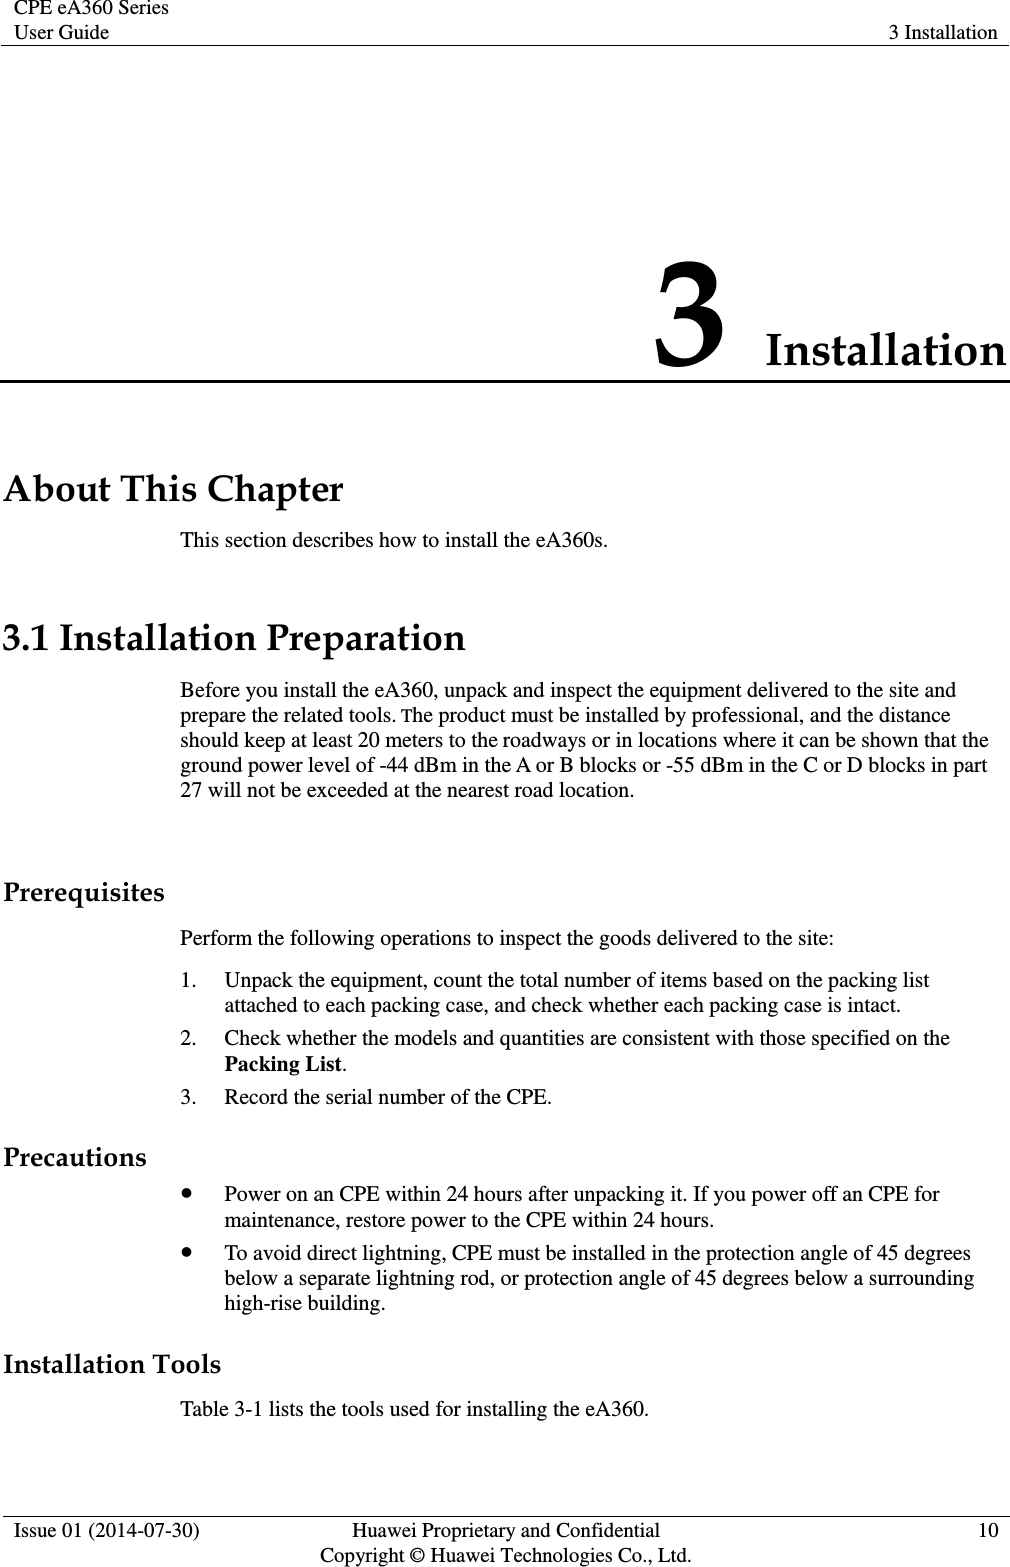 CPE eA360 Series User Guide 3 Installation  Issue 01 (2014-07-30) Huawei Proprietary and Confidential                                     Copyright © Huawei Technologies Co., Ltd. 10  3 Installation About This Chapter This section describes how to install the eA360s. 3.1 Installation Preparation Before you install the eA360, unpack and inspect the equipment delivered to the site and prepare the related tools. The product must be installed by professional, and the distance should keep at least 20 meters to the roadways or in locations where it can be shown that the ground power level of -44 dBm in the A or B blocks or -55 dBm in the C or D blocks in part 27 will not be exceeded at the nearest road location.  Prerequisites Perform the following operations to inspect the goods delivered to the site: 1. Unpack the equipment, count the total number of items based on the packing list attached to each packing case, and check whether each packing case is intact.   2. Check whether the models and quantities are consistent with those specified on the Packing List. 3. Record the serial number of the CPE.   Precautions  Power on an CPE within 24 hours after unpacking it. If you power off an CPE for maintenance, restore power to the CPE within 24 hours.  To avoid direct lightning, CPE must be installed in the protection angle of 45 degrees below a separate lightning rod, or protection angle of 45 degrees below a surrounding high-rise building. Installation Tools Table 3-1 lists the tools used for installing the eA360. 